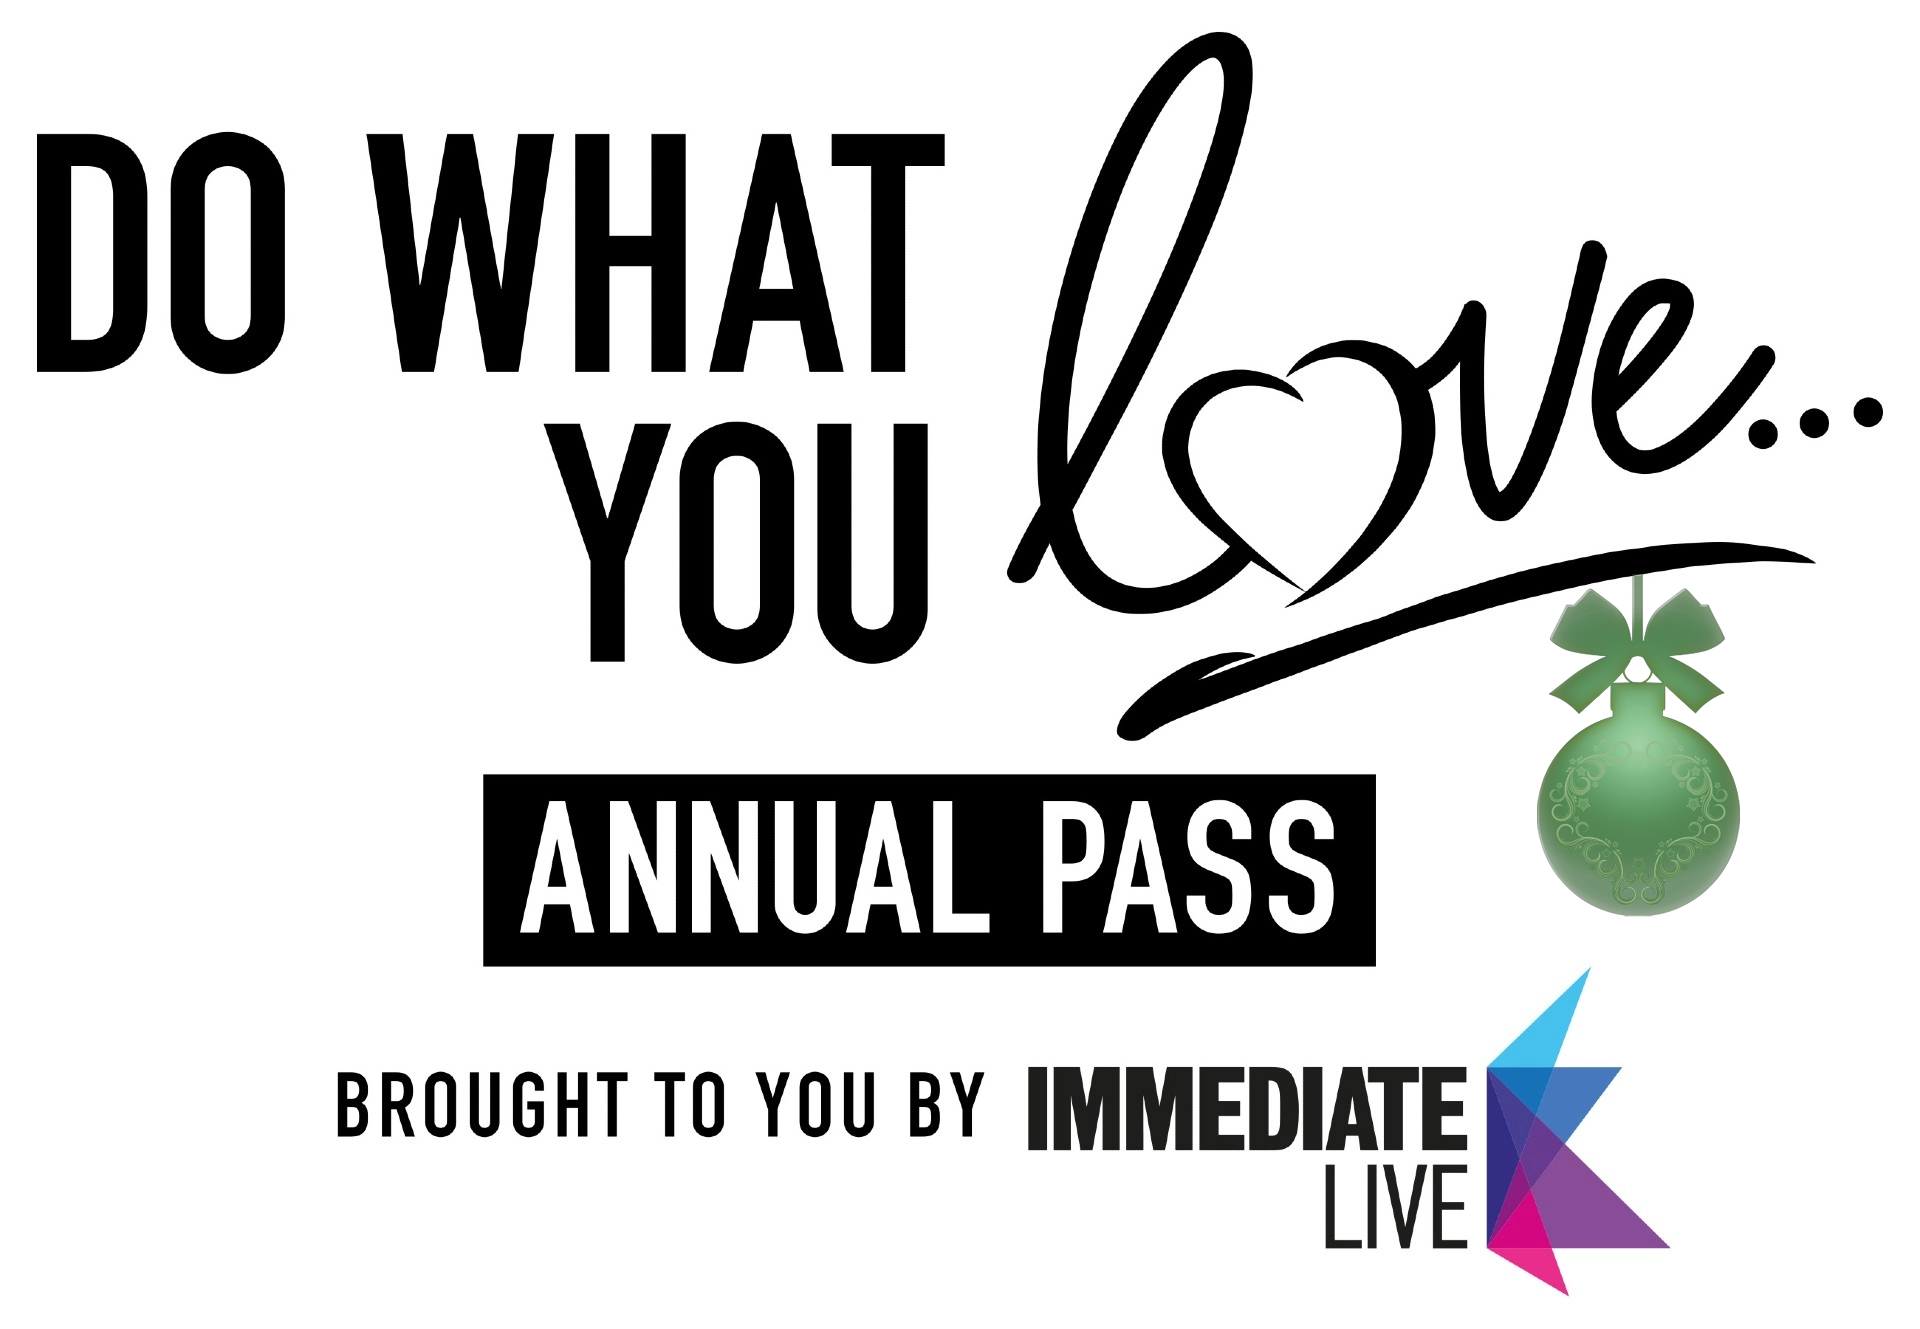 Do-What-you-Love-Annual-Pass-logo with bauble